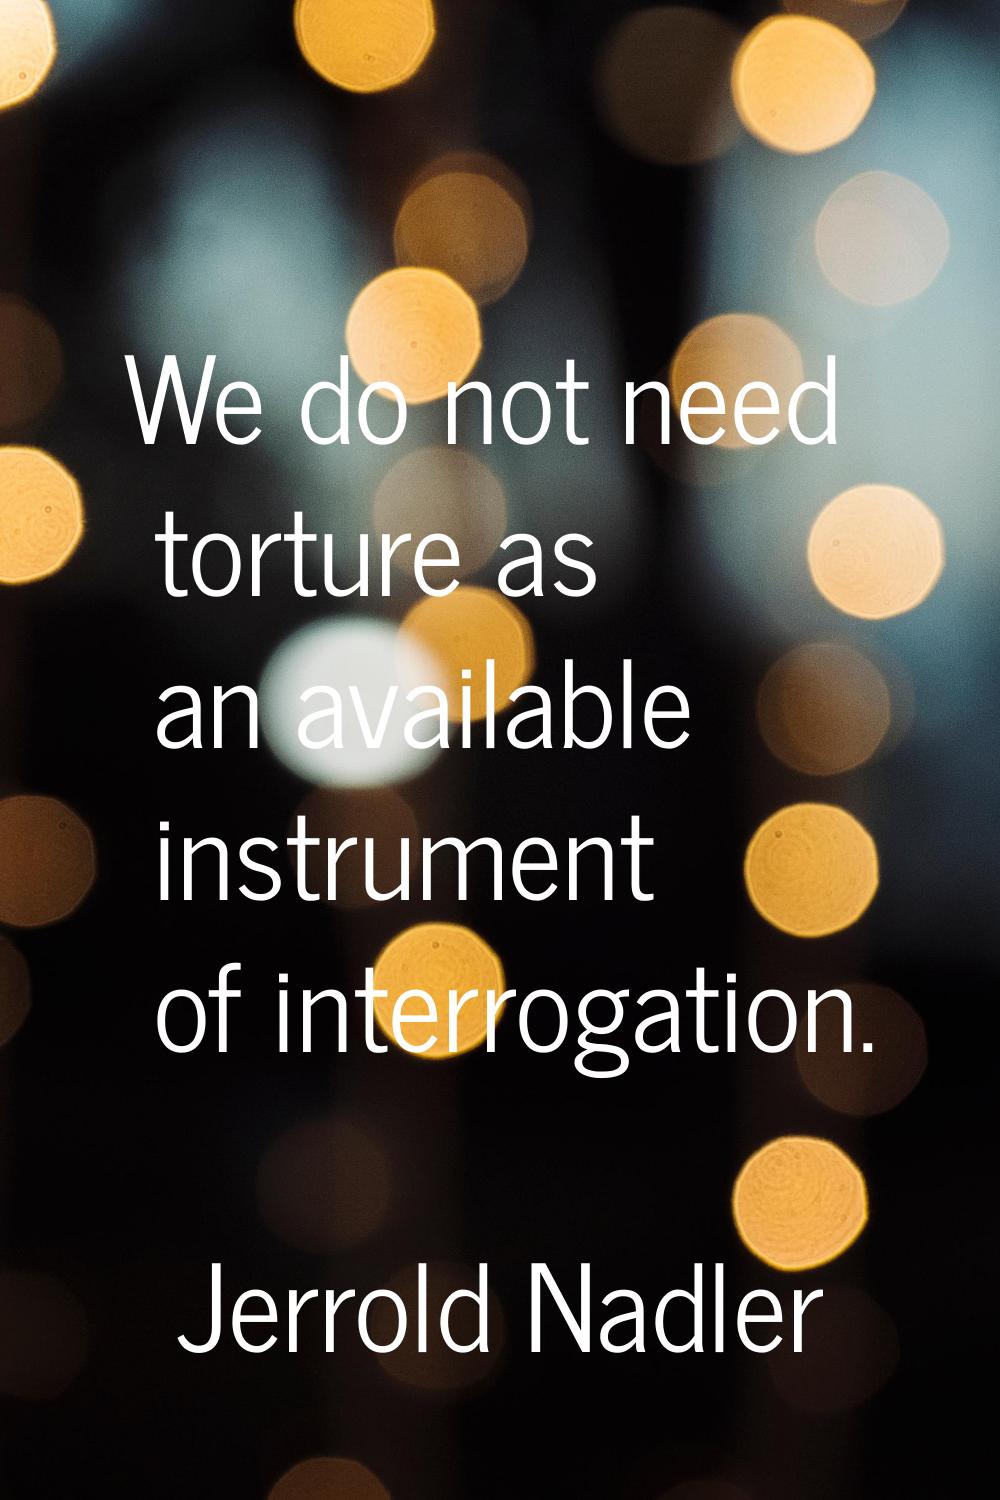 We do not need torture as an available instrument of interrogation.